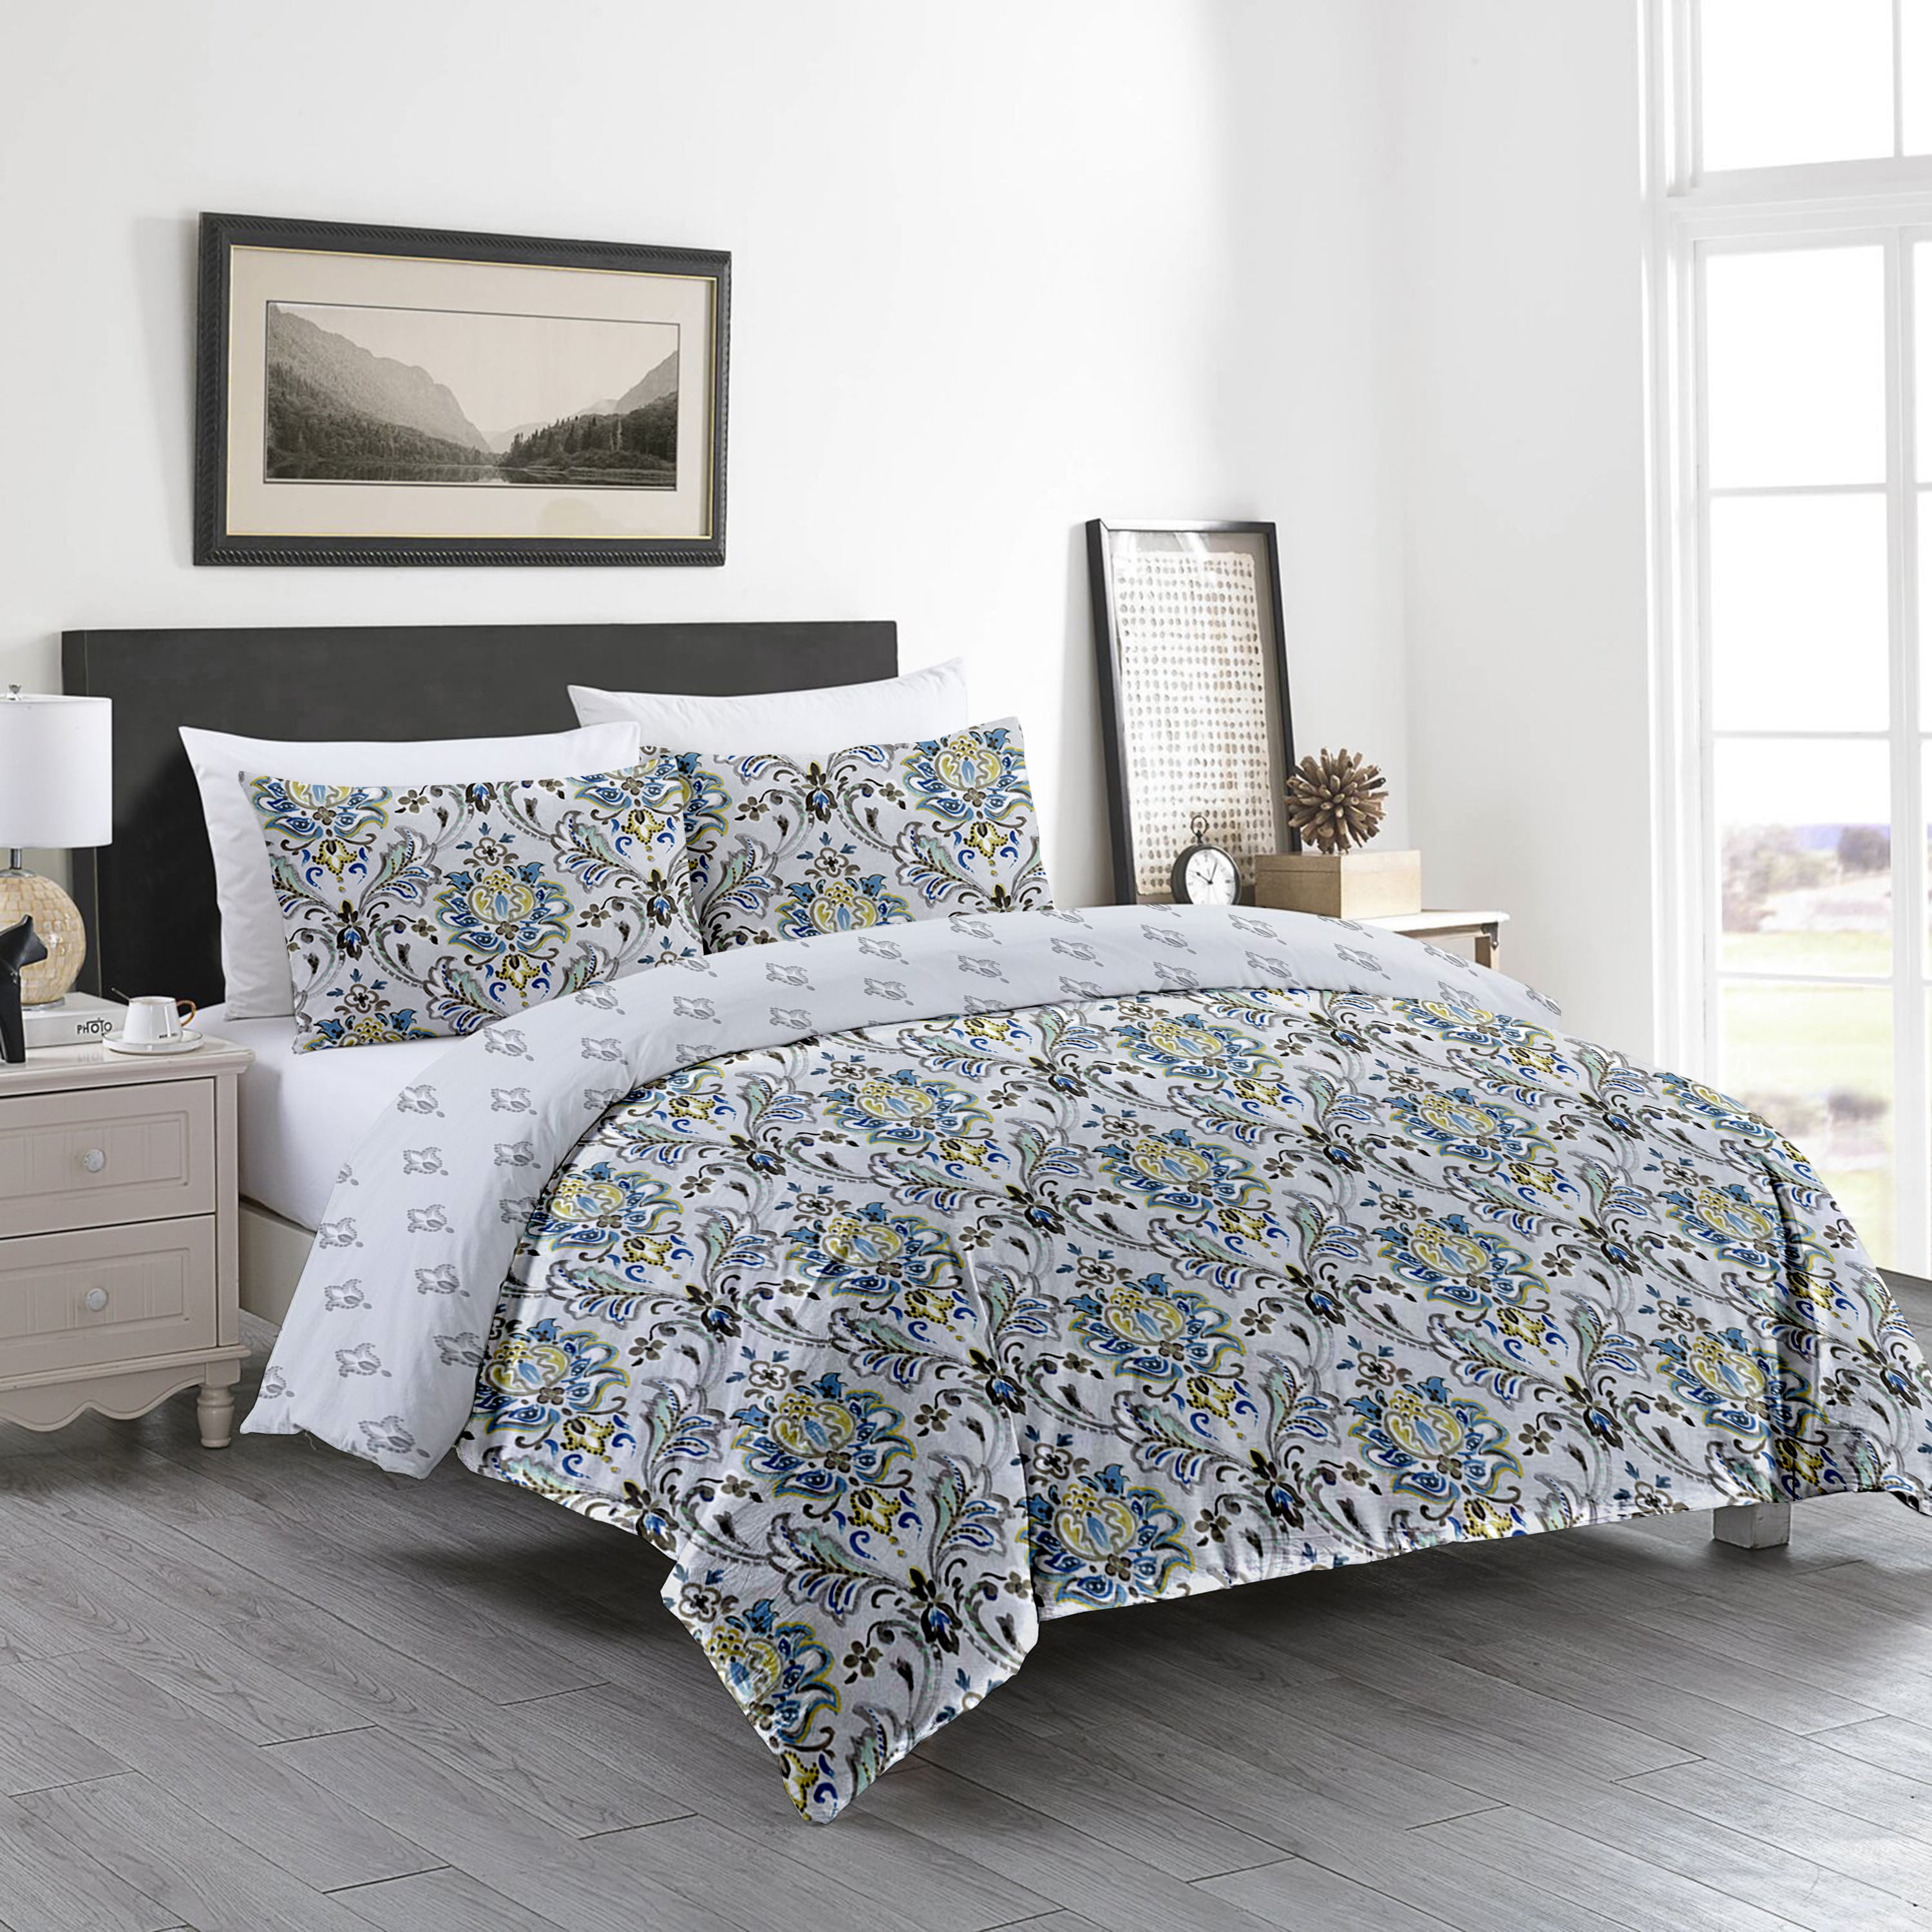 Printed With Cotton Satin Fabric And Certified Organic Dyes Duvet Cover Bedding Set Linens Set Young man